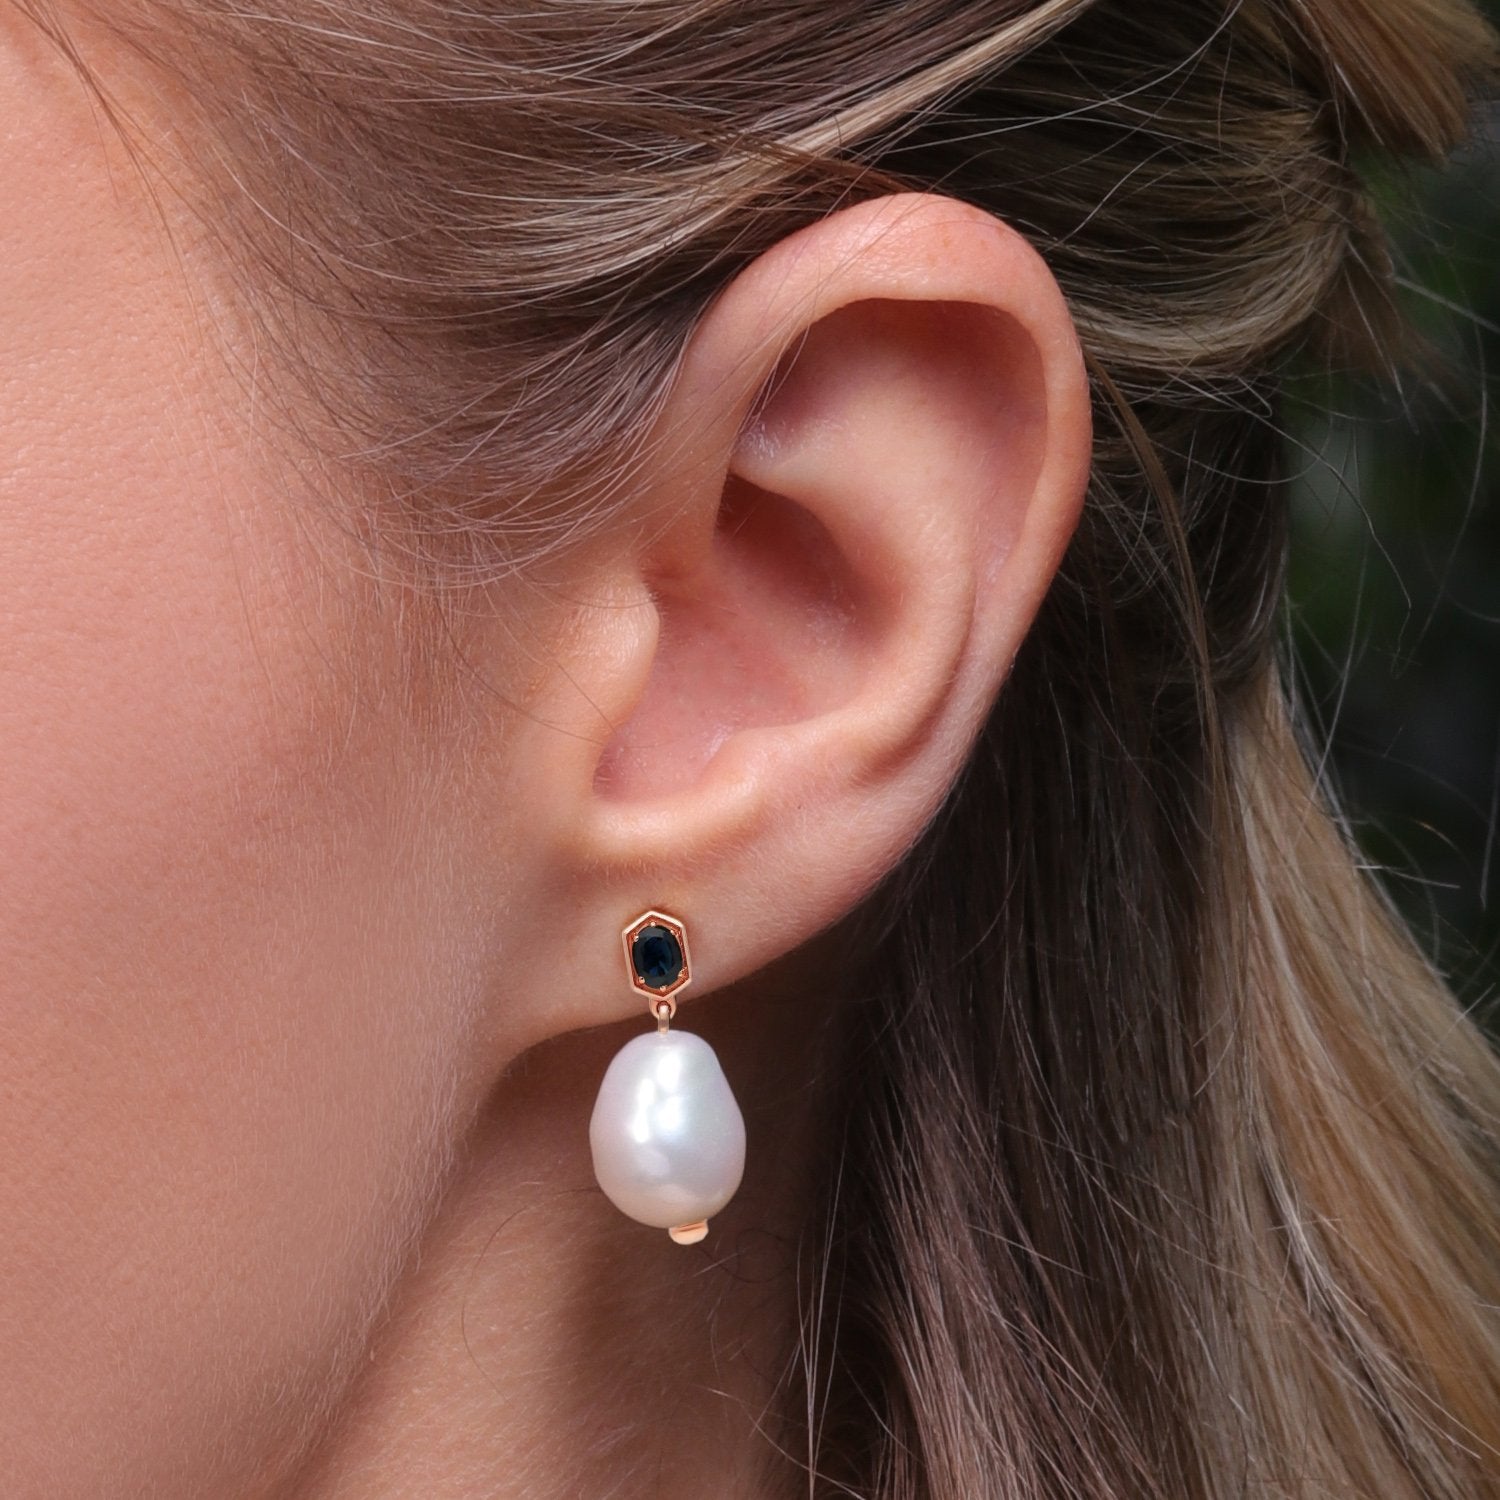 Modern Baroque Pearl & Sapphire Drop Earrings in Rose Gold Plated Sterling Silver on Model